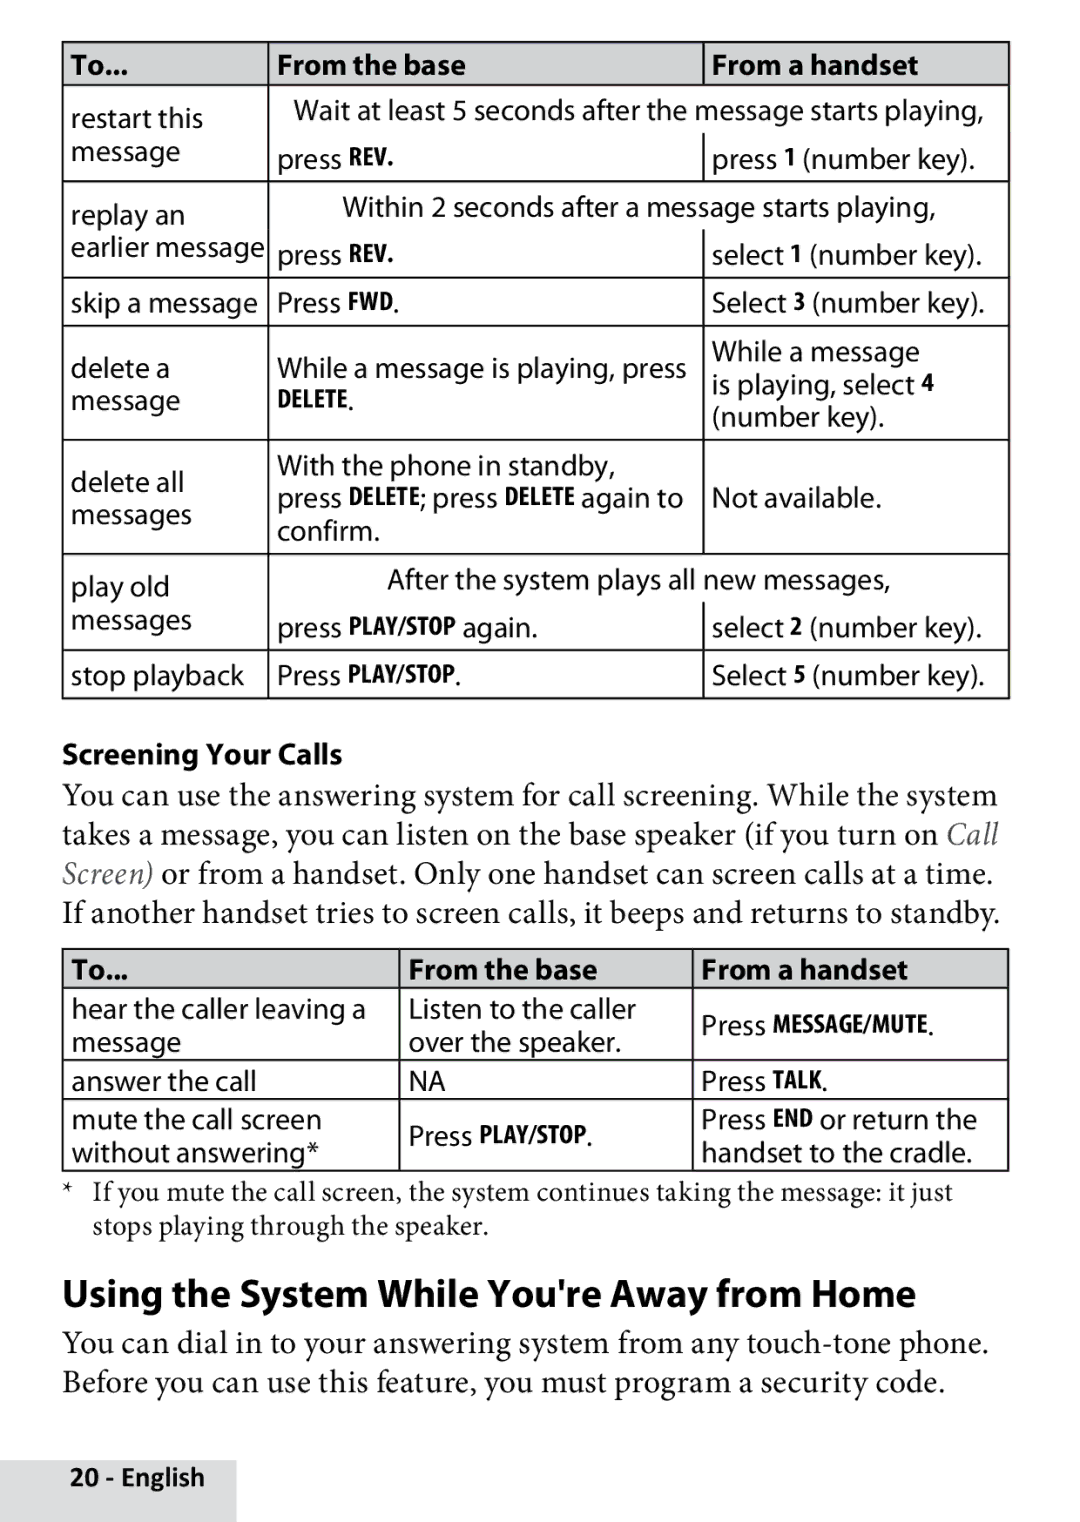 Uniden D22802 manual Using the System While Youre Away from Home, Screening Your Calls 